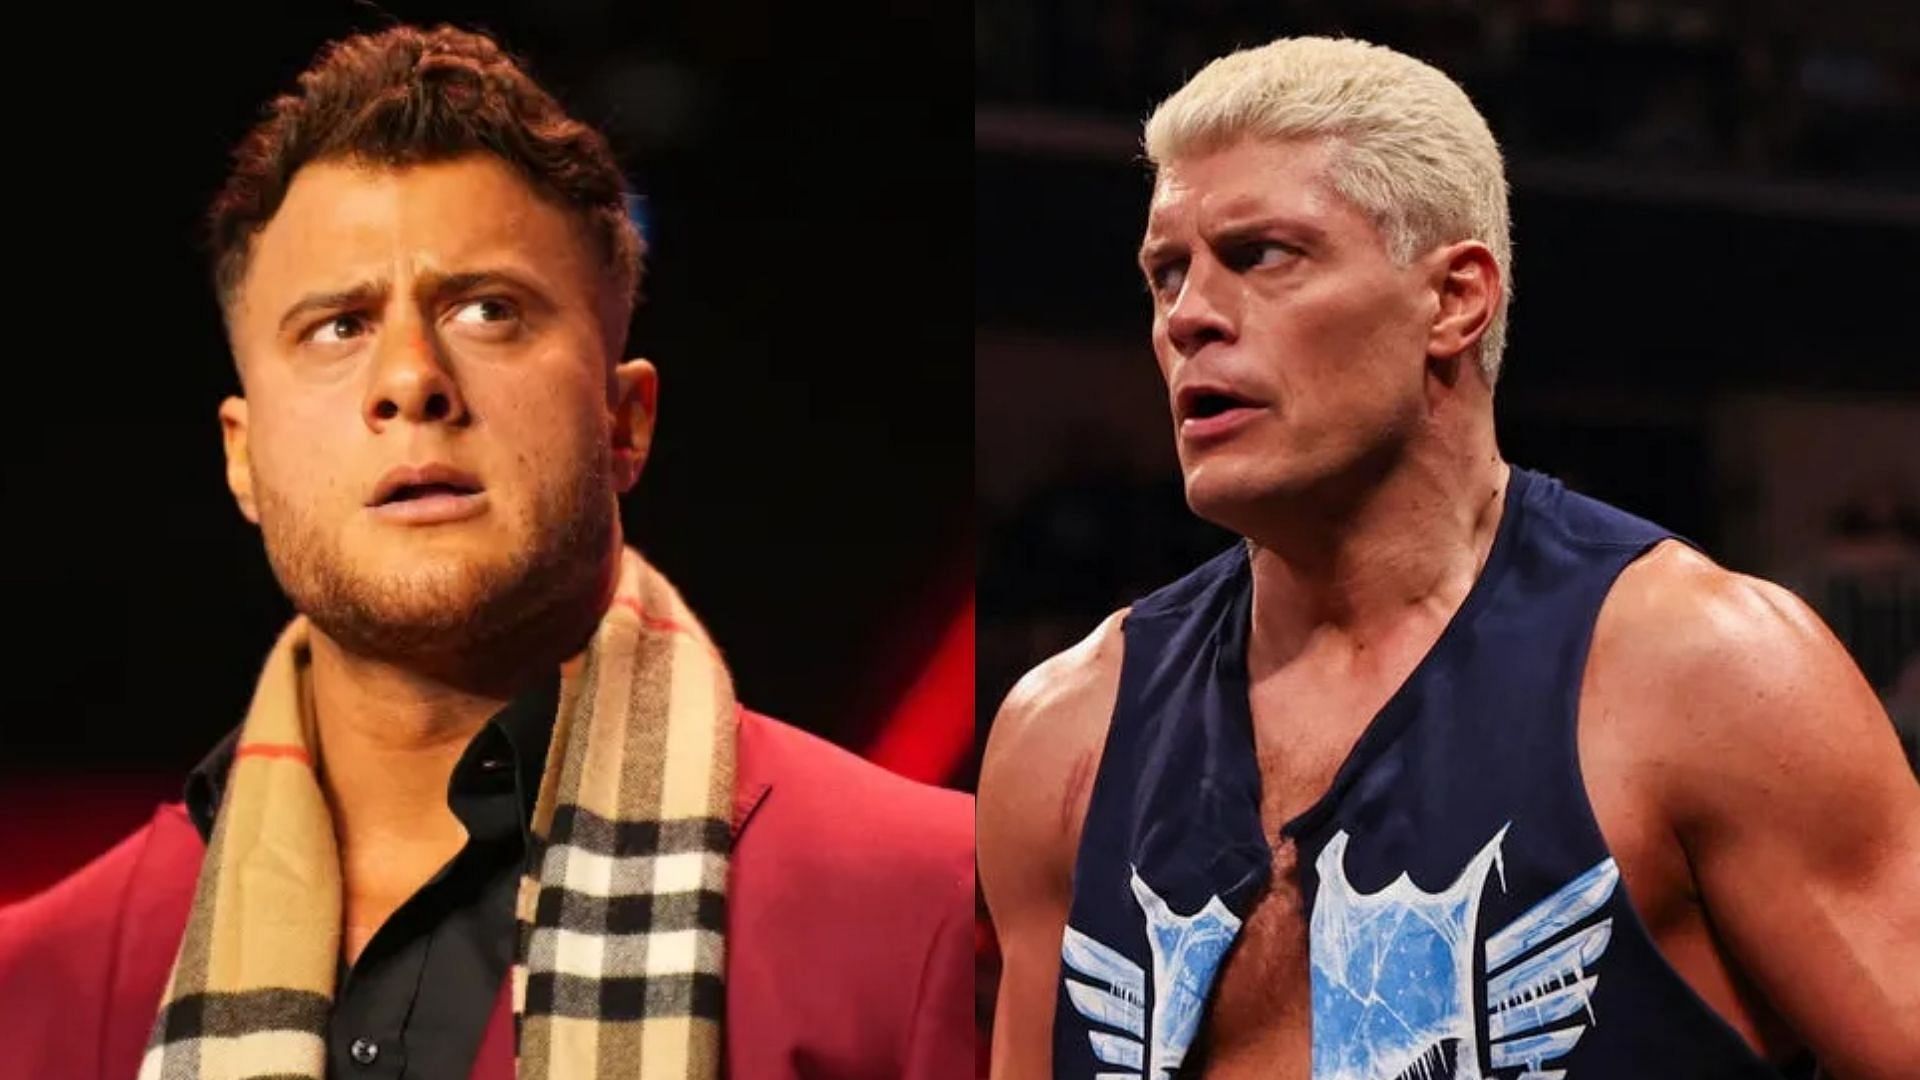 Cody Rhodes has never won a World Title in WWE